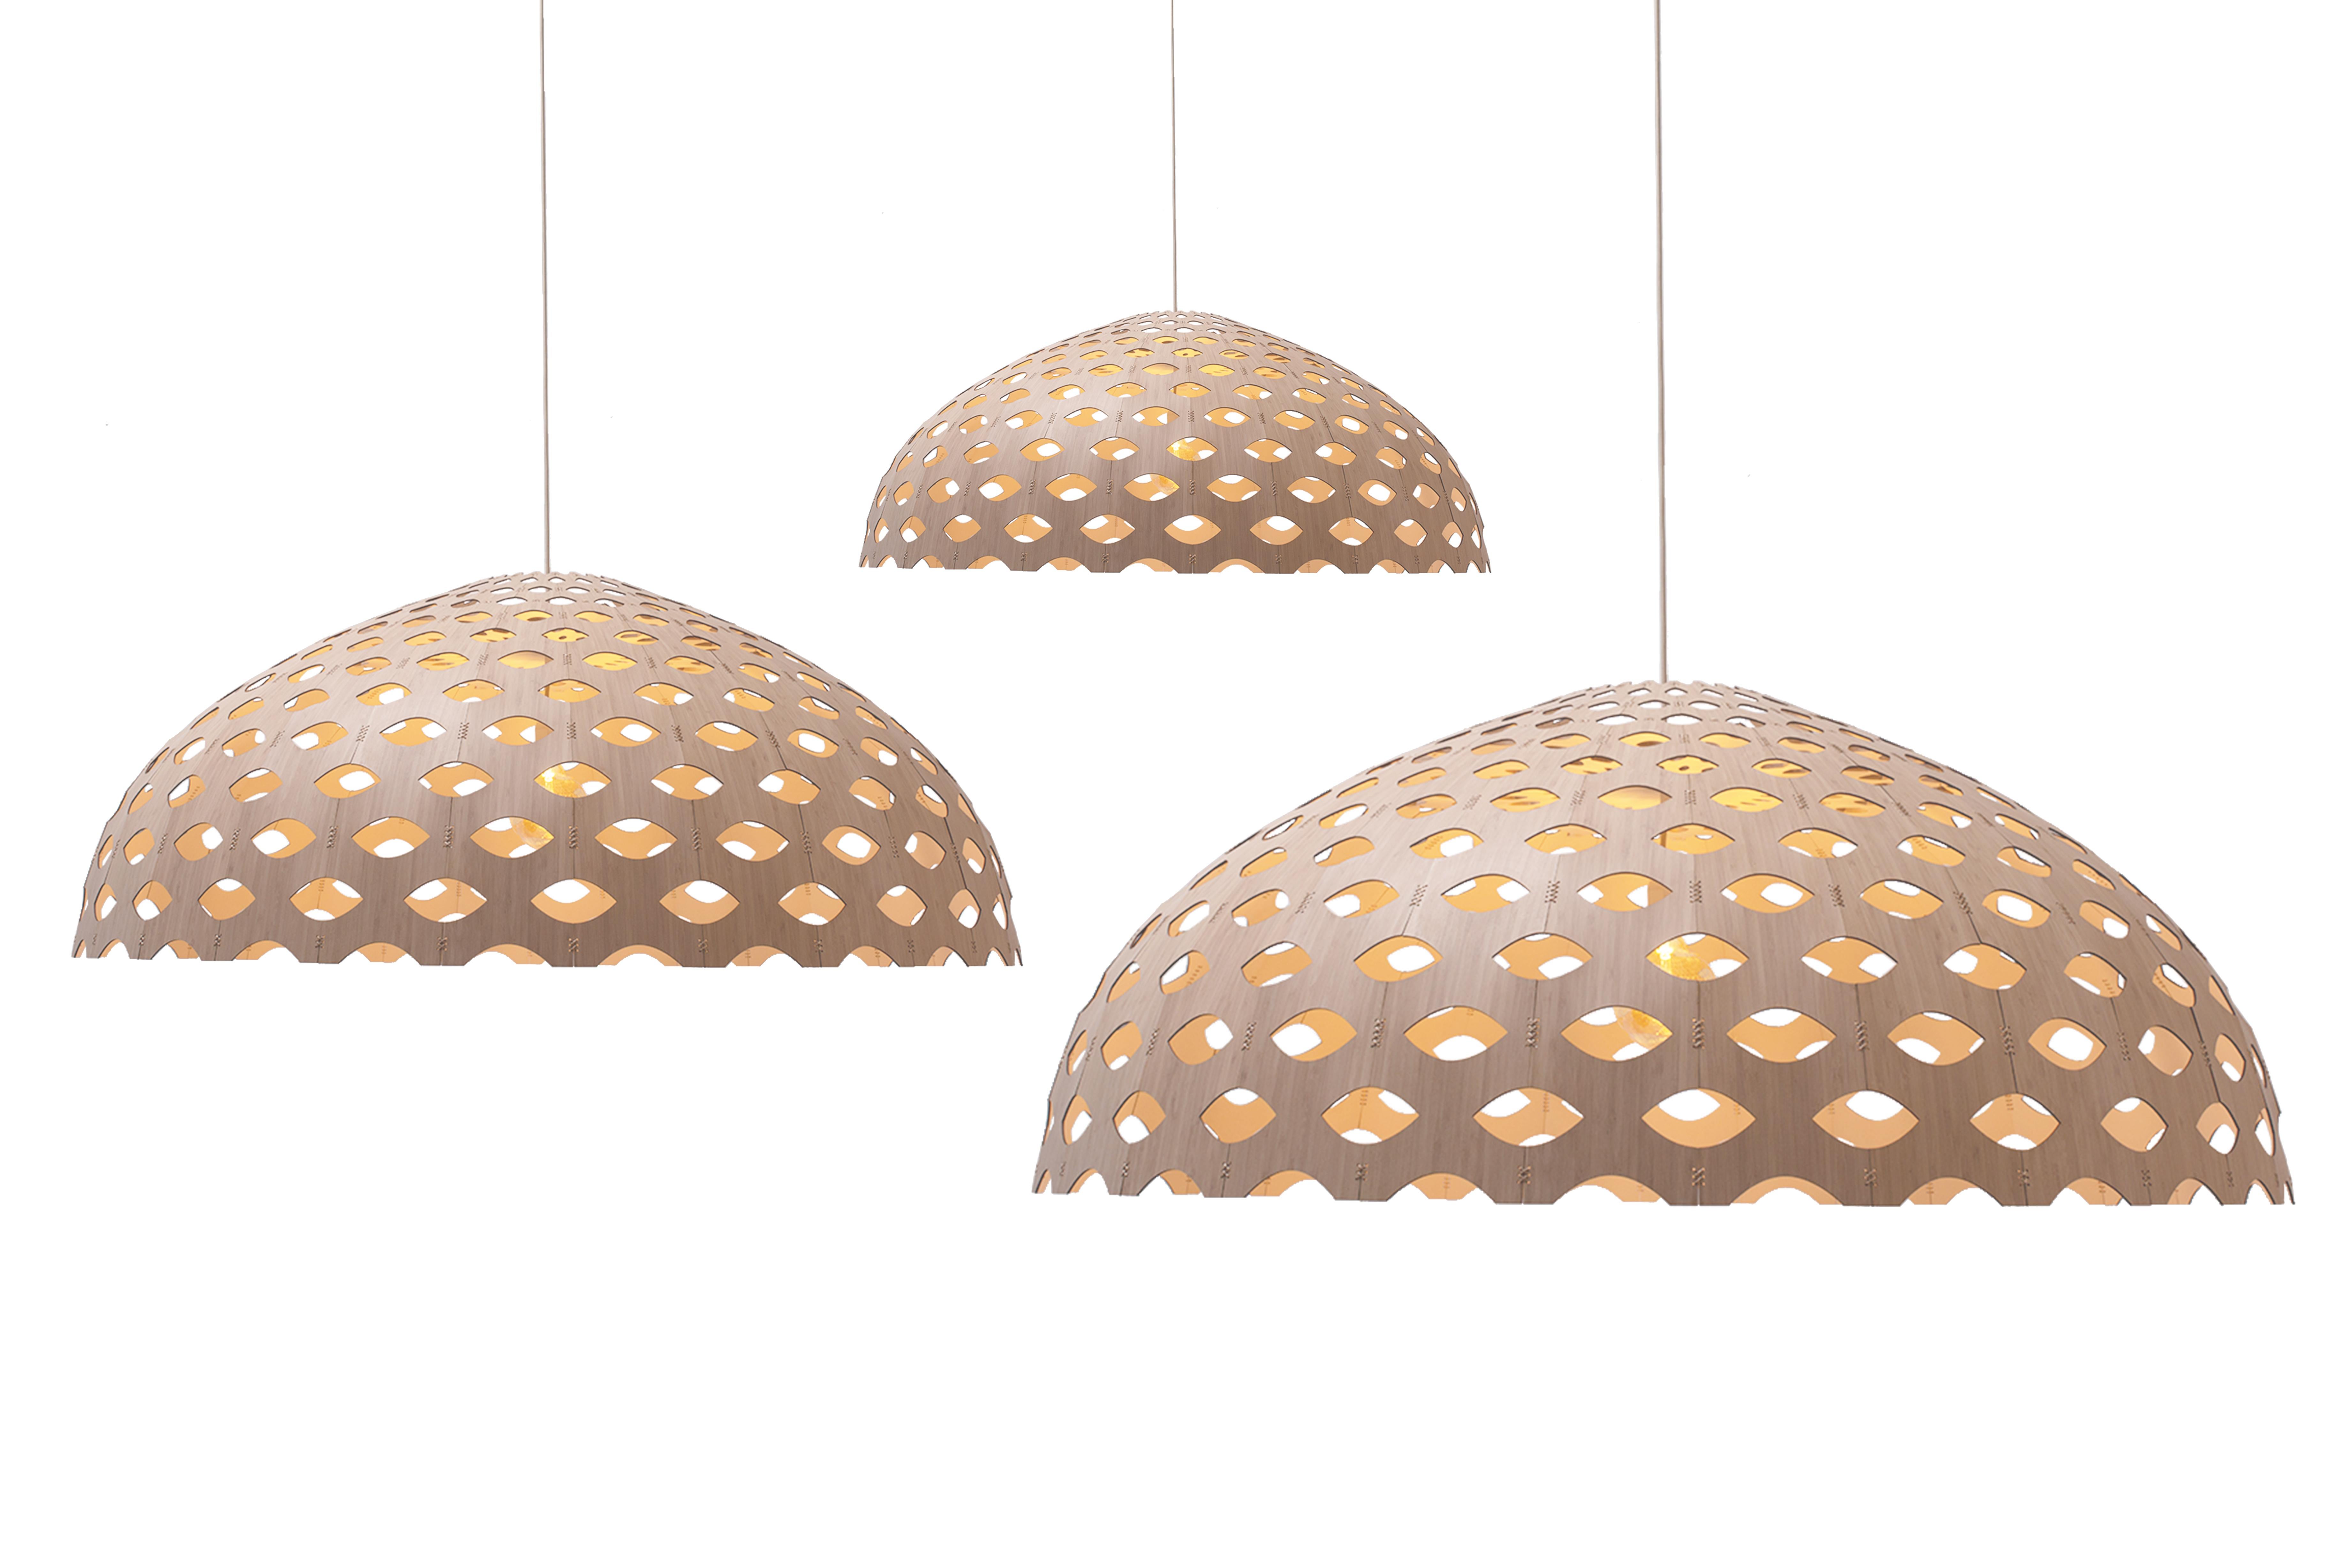 Woodwork Panelitos Dome Lamp Large by Piegatto  For Sale